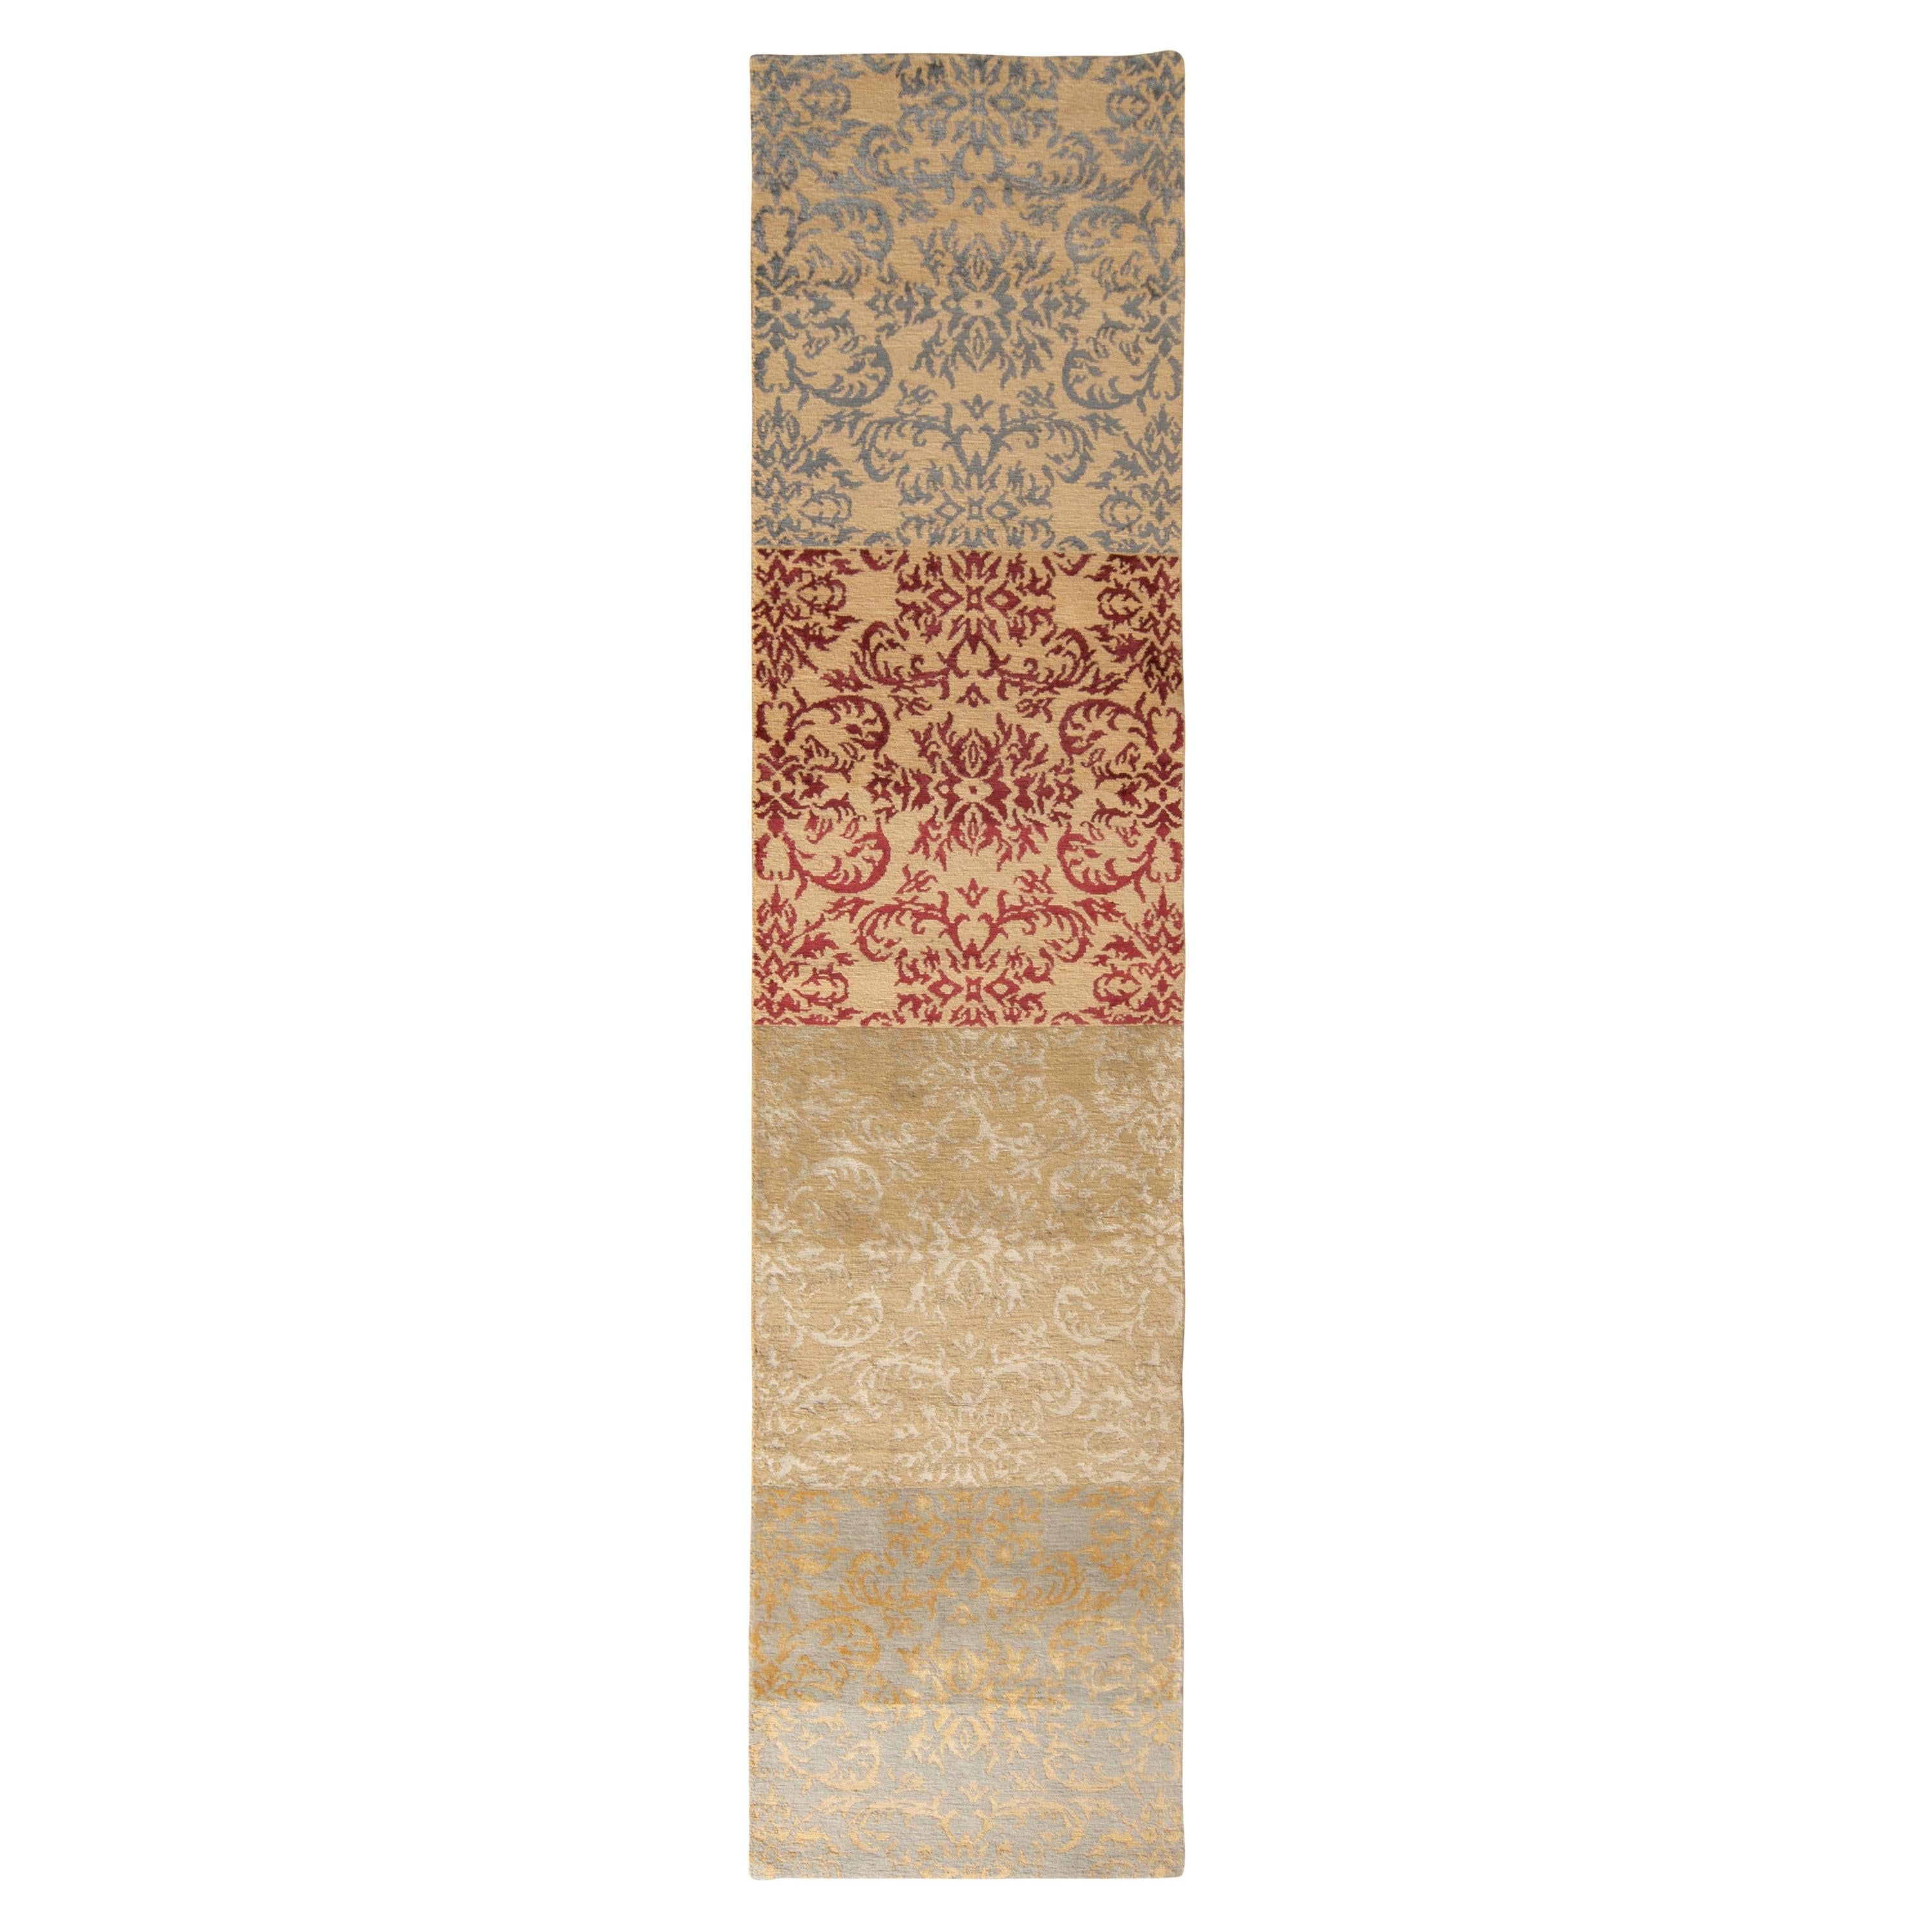 Rug & Kilim’s European Style Runner in Beige-Brown and Gold Arabesque Pattern For Sale